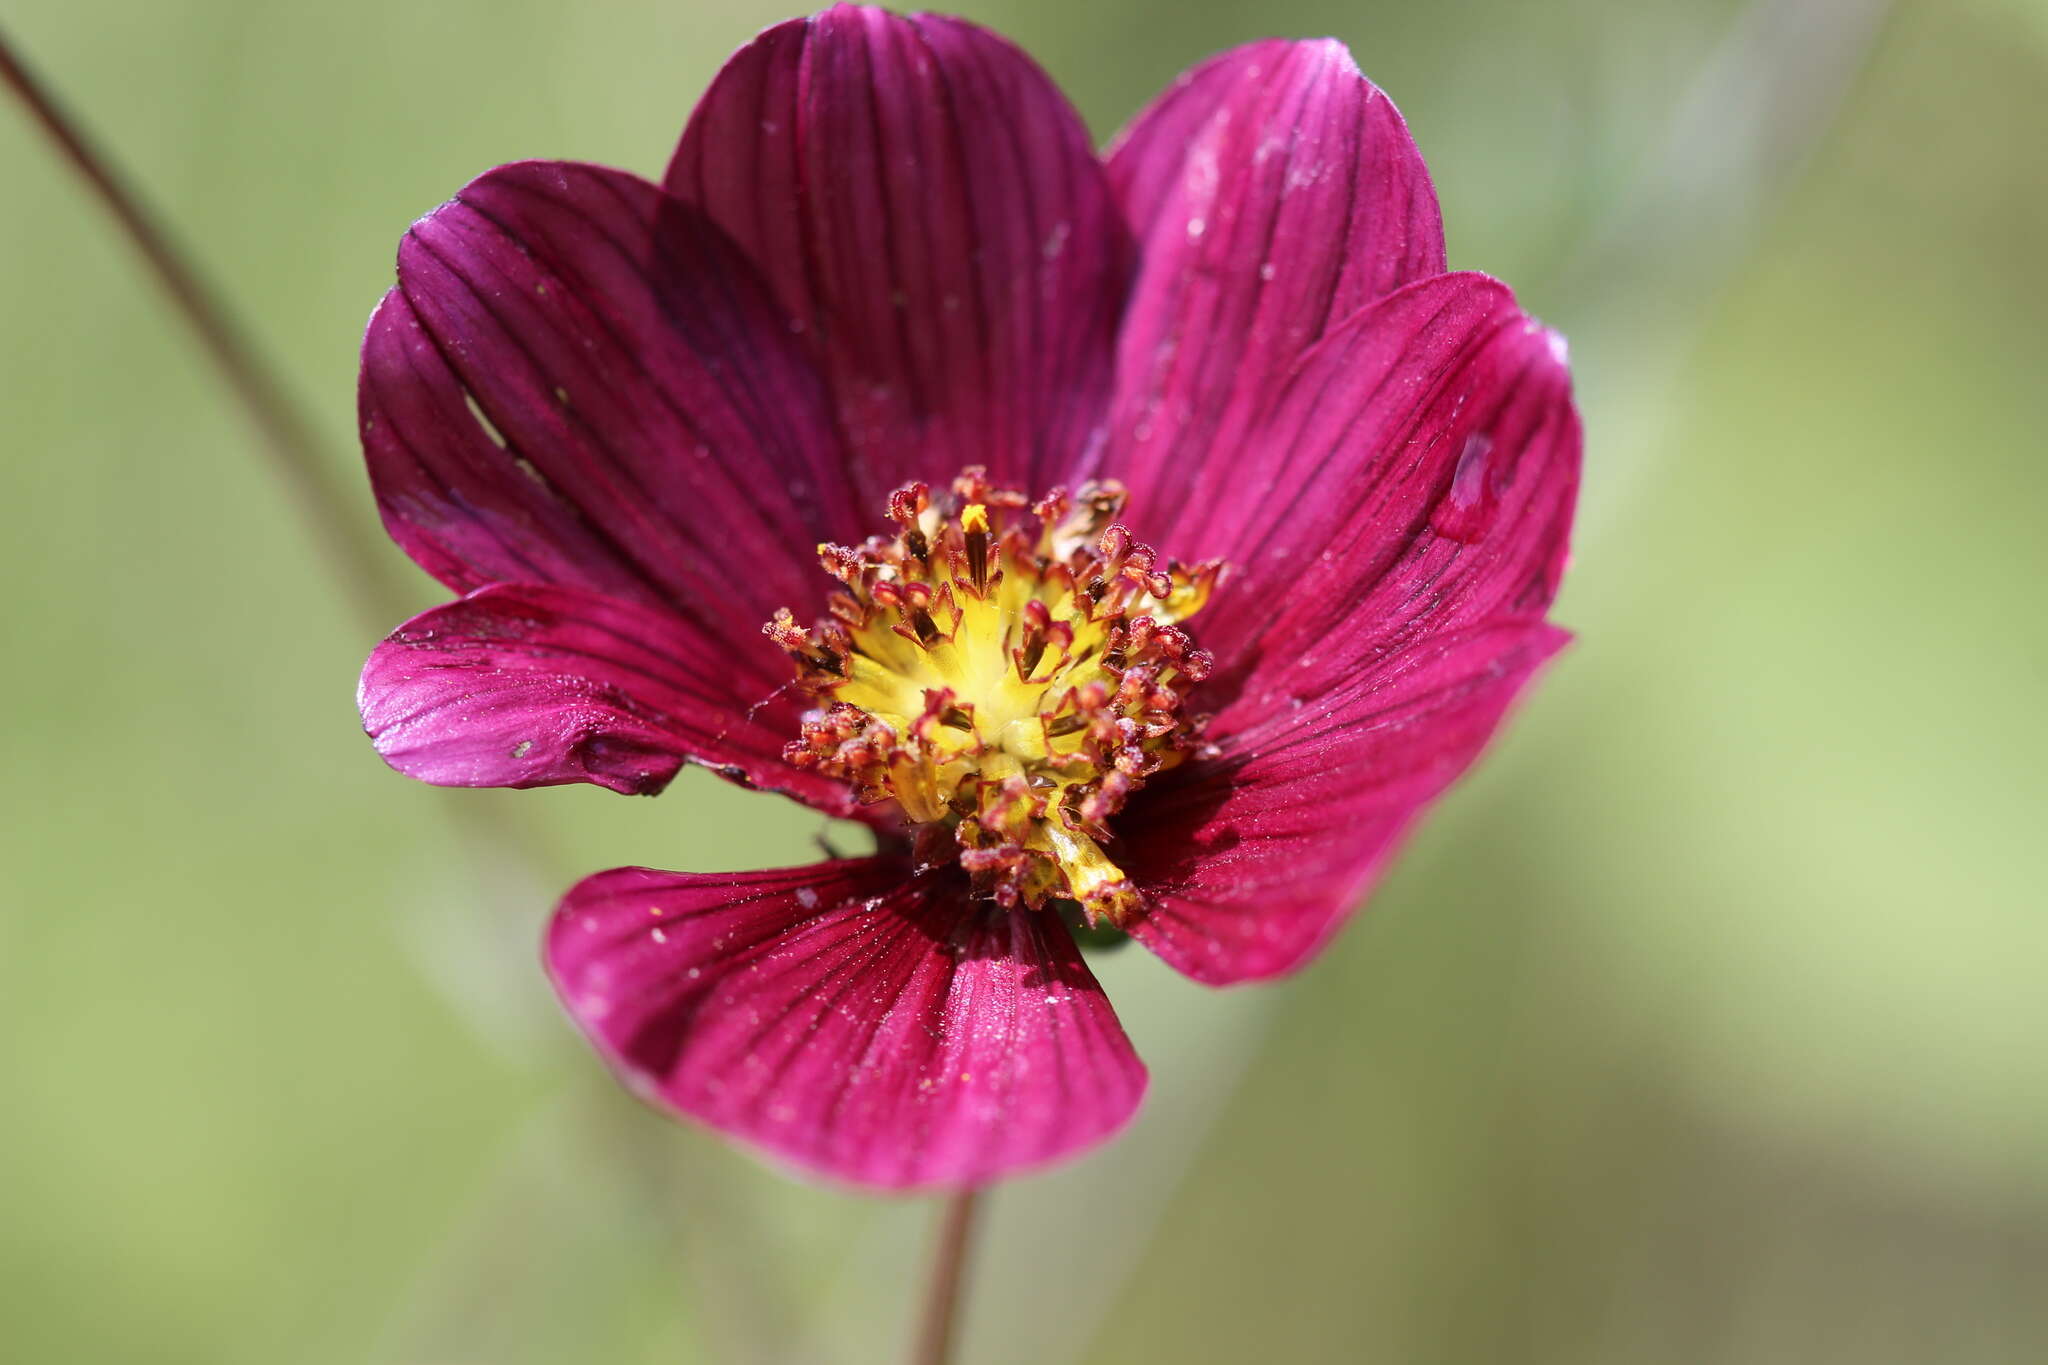 Image of Cosmos scabiosoides Kunth